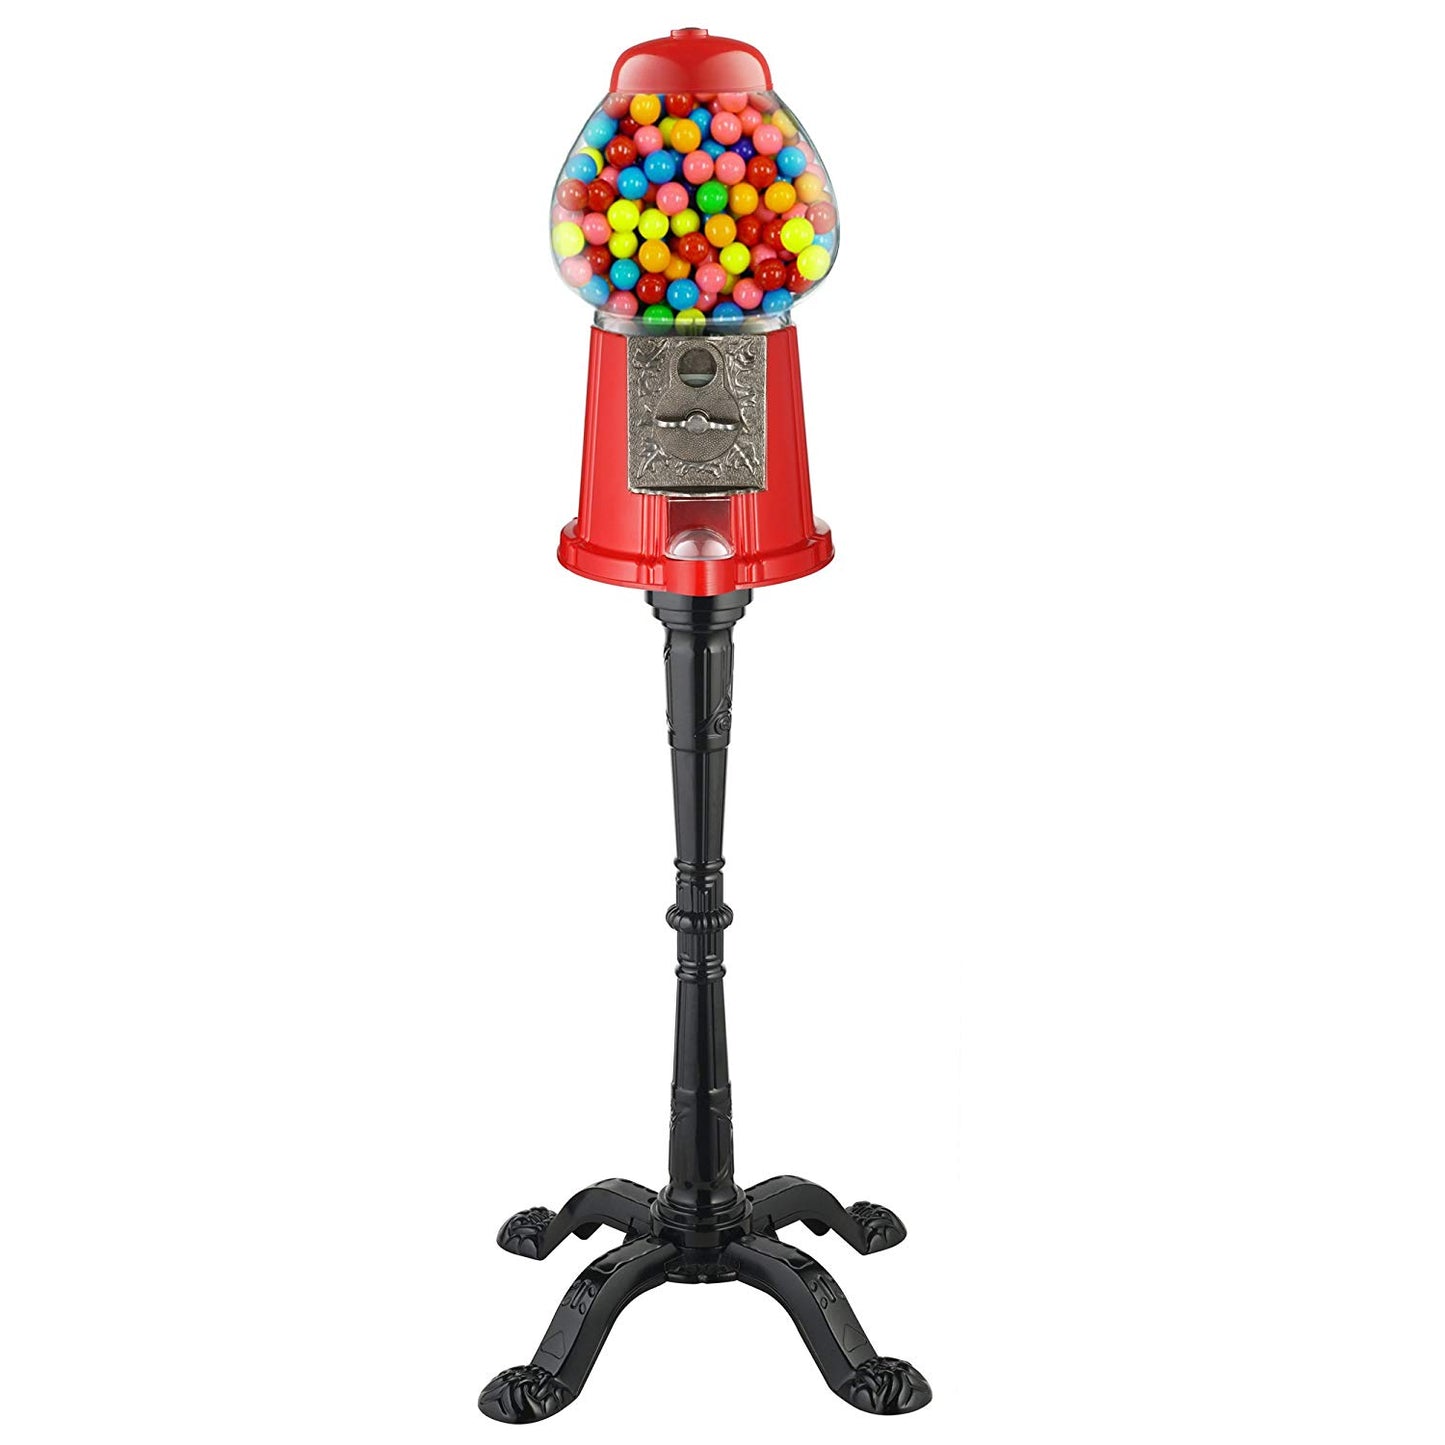 Vintage Candy Gumball Machine - oddgifts.com